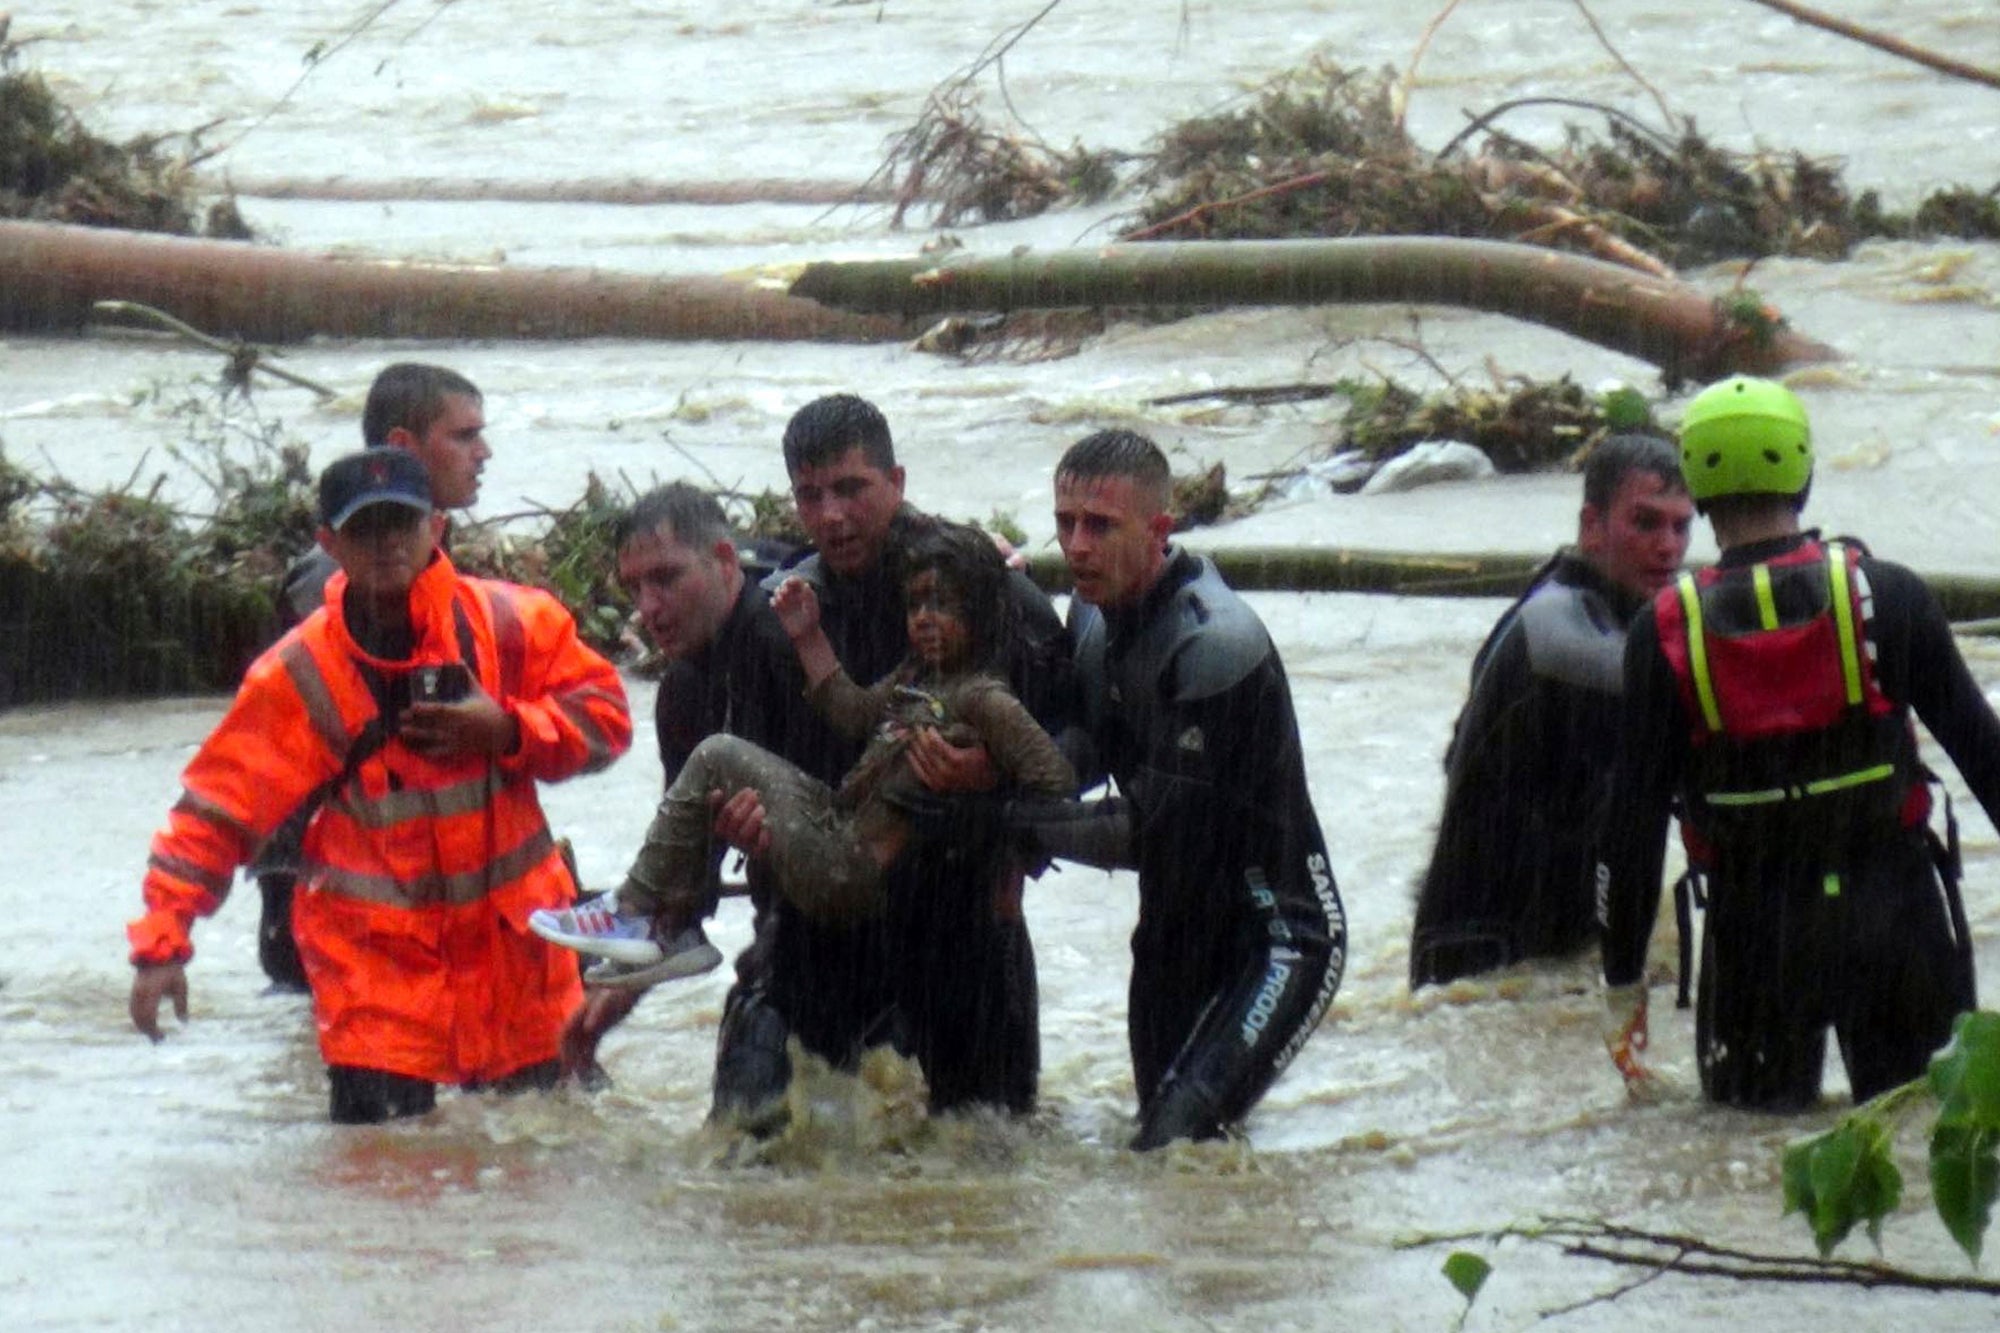 Emergency team members rescue a young girl during floods in a campsite in Kirklareli province, Turkey